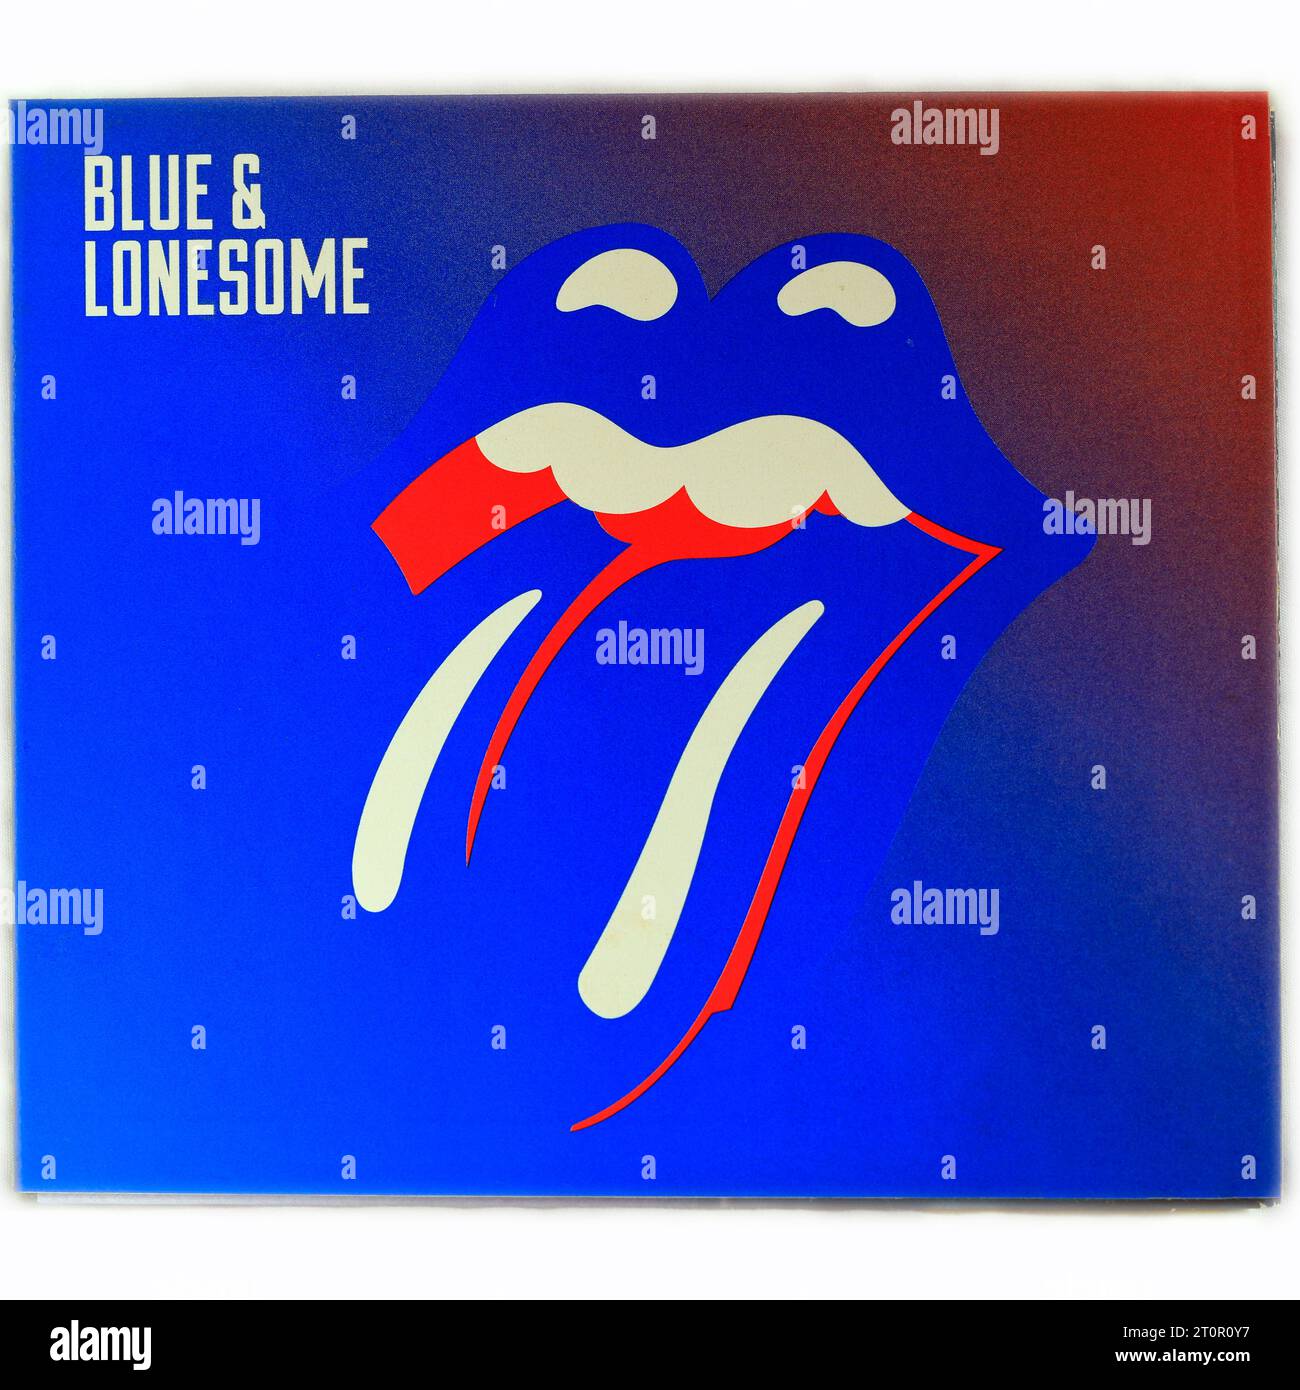 The Rolling Stones - Blue & Lonesome. Card CD case on light background Stock Photo